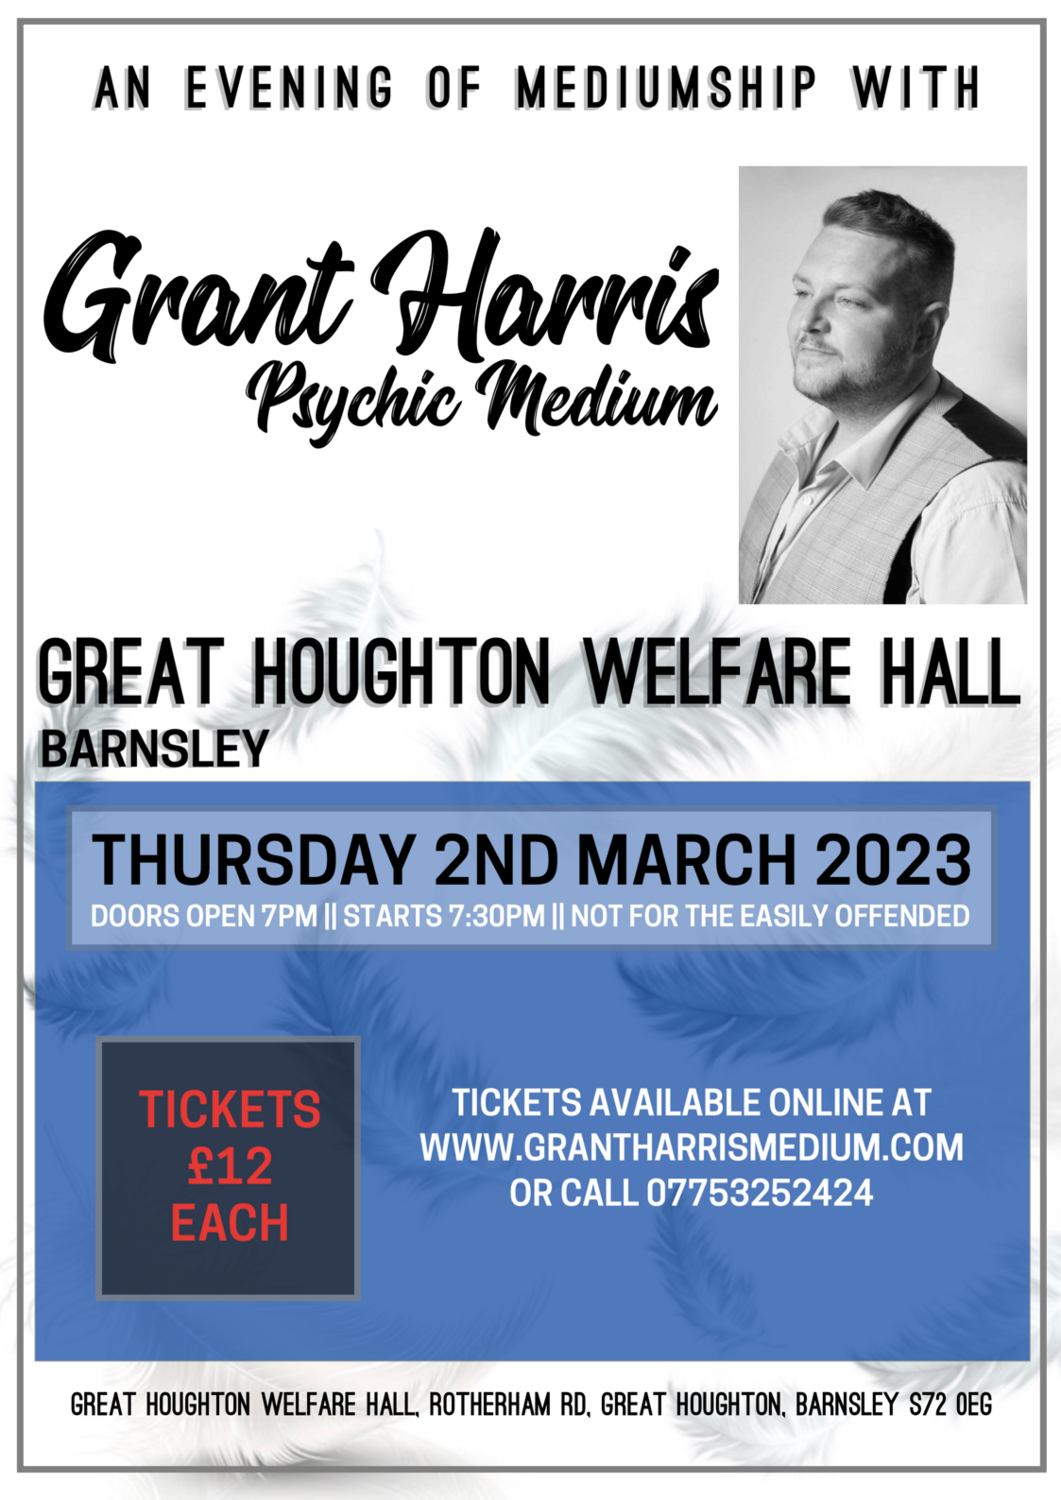 Great Houghton Welfare Hall, Thursday 2nd March 2023